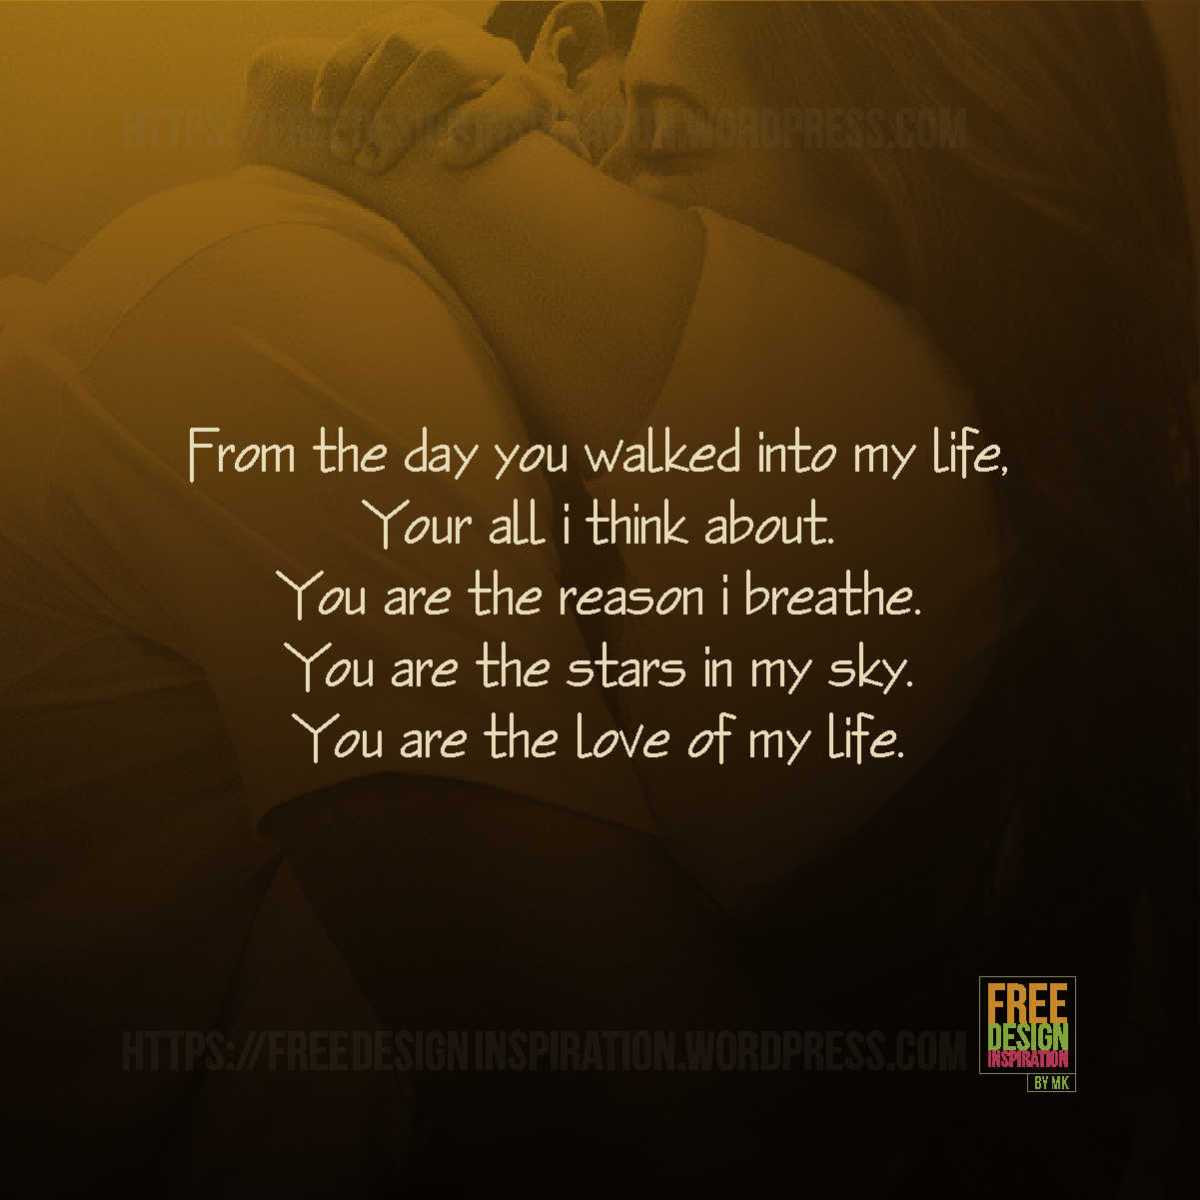 My Love My Life Quotes
 You are love of my life – Free Design Inspiration